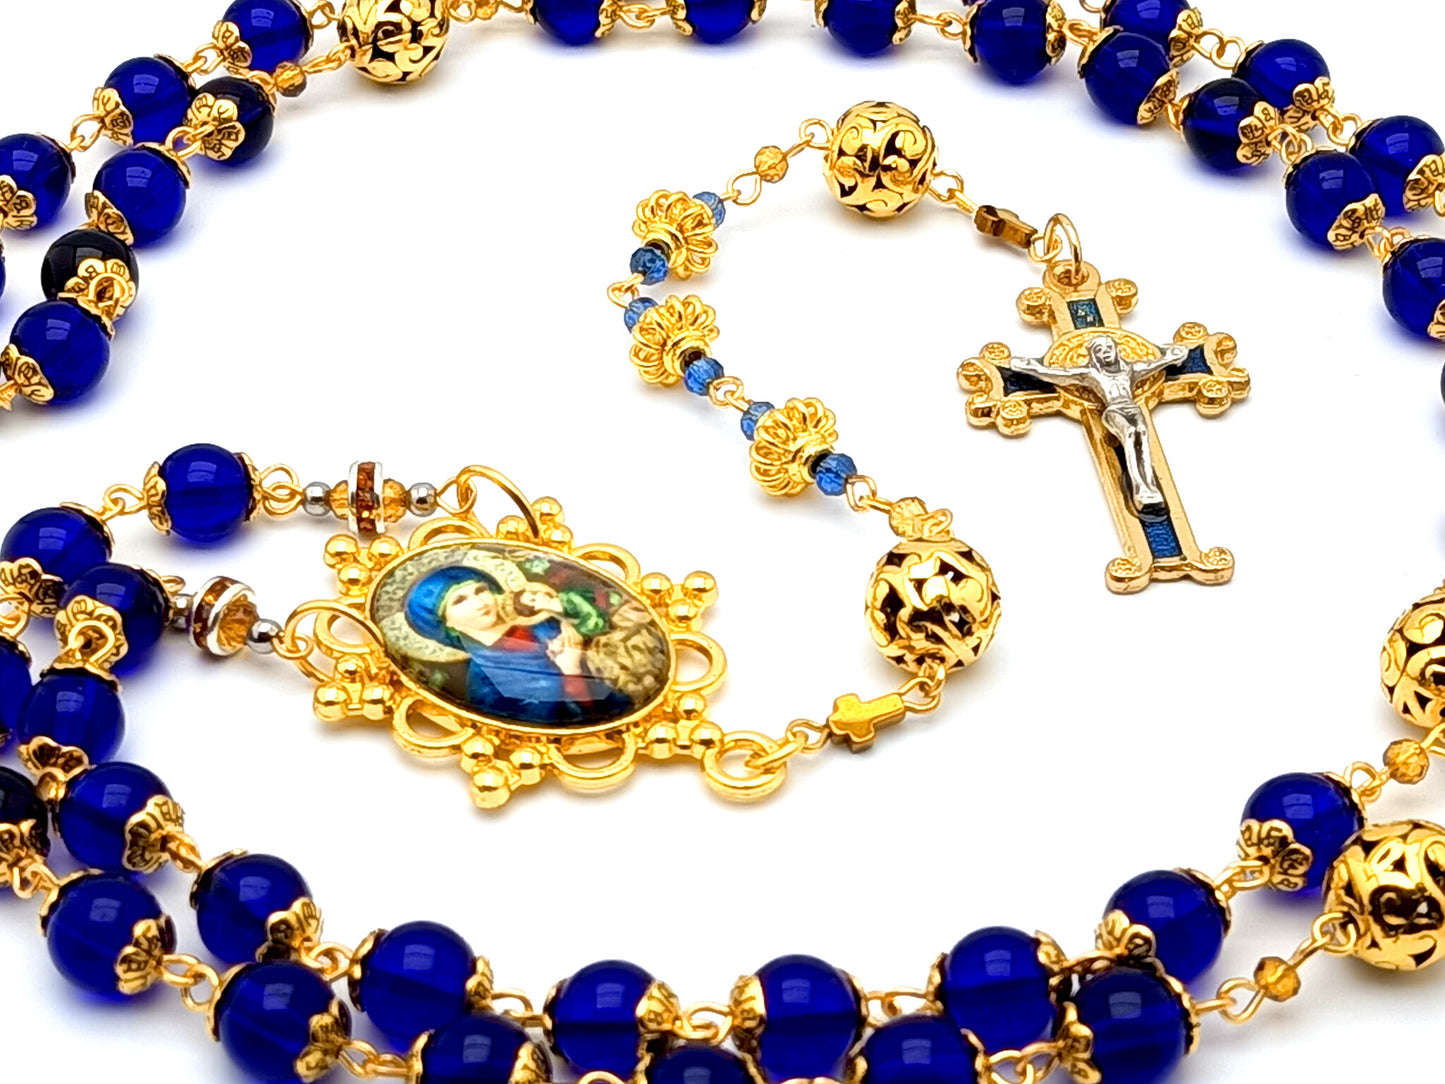 Our Lady of Perpetual Help unique rosary beads with blue glass and gold plated Our Father beads and blue enamel Saint Benedict crucifix.